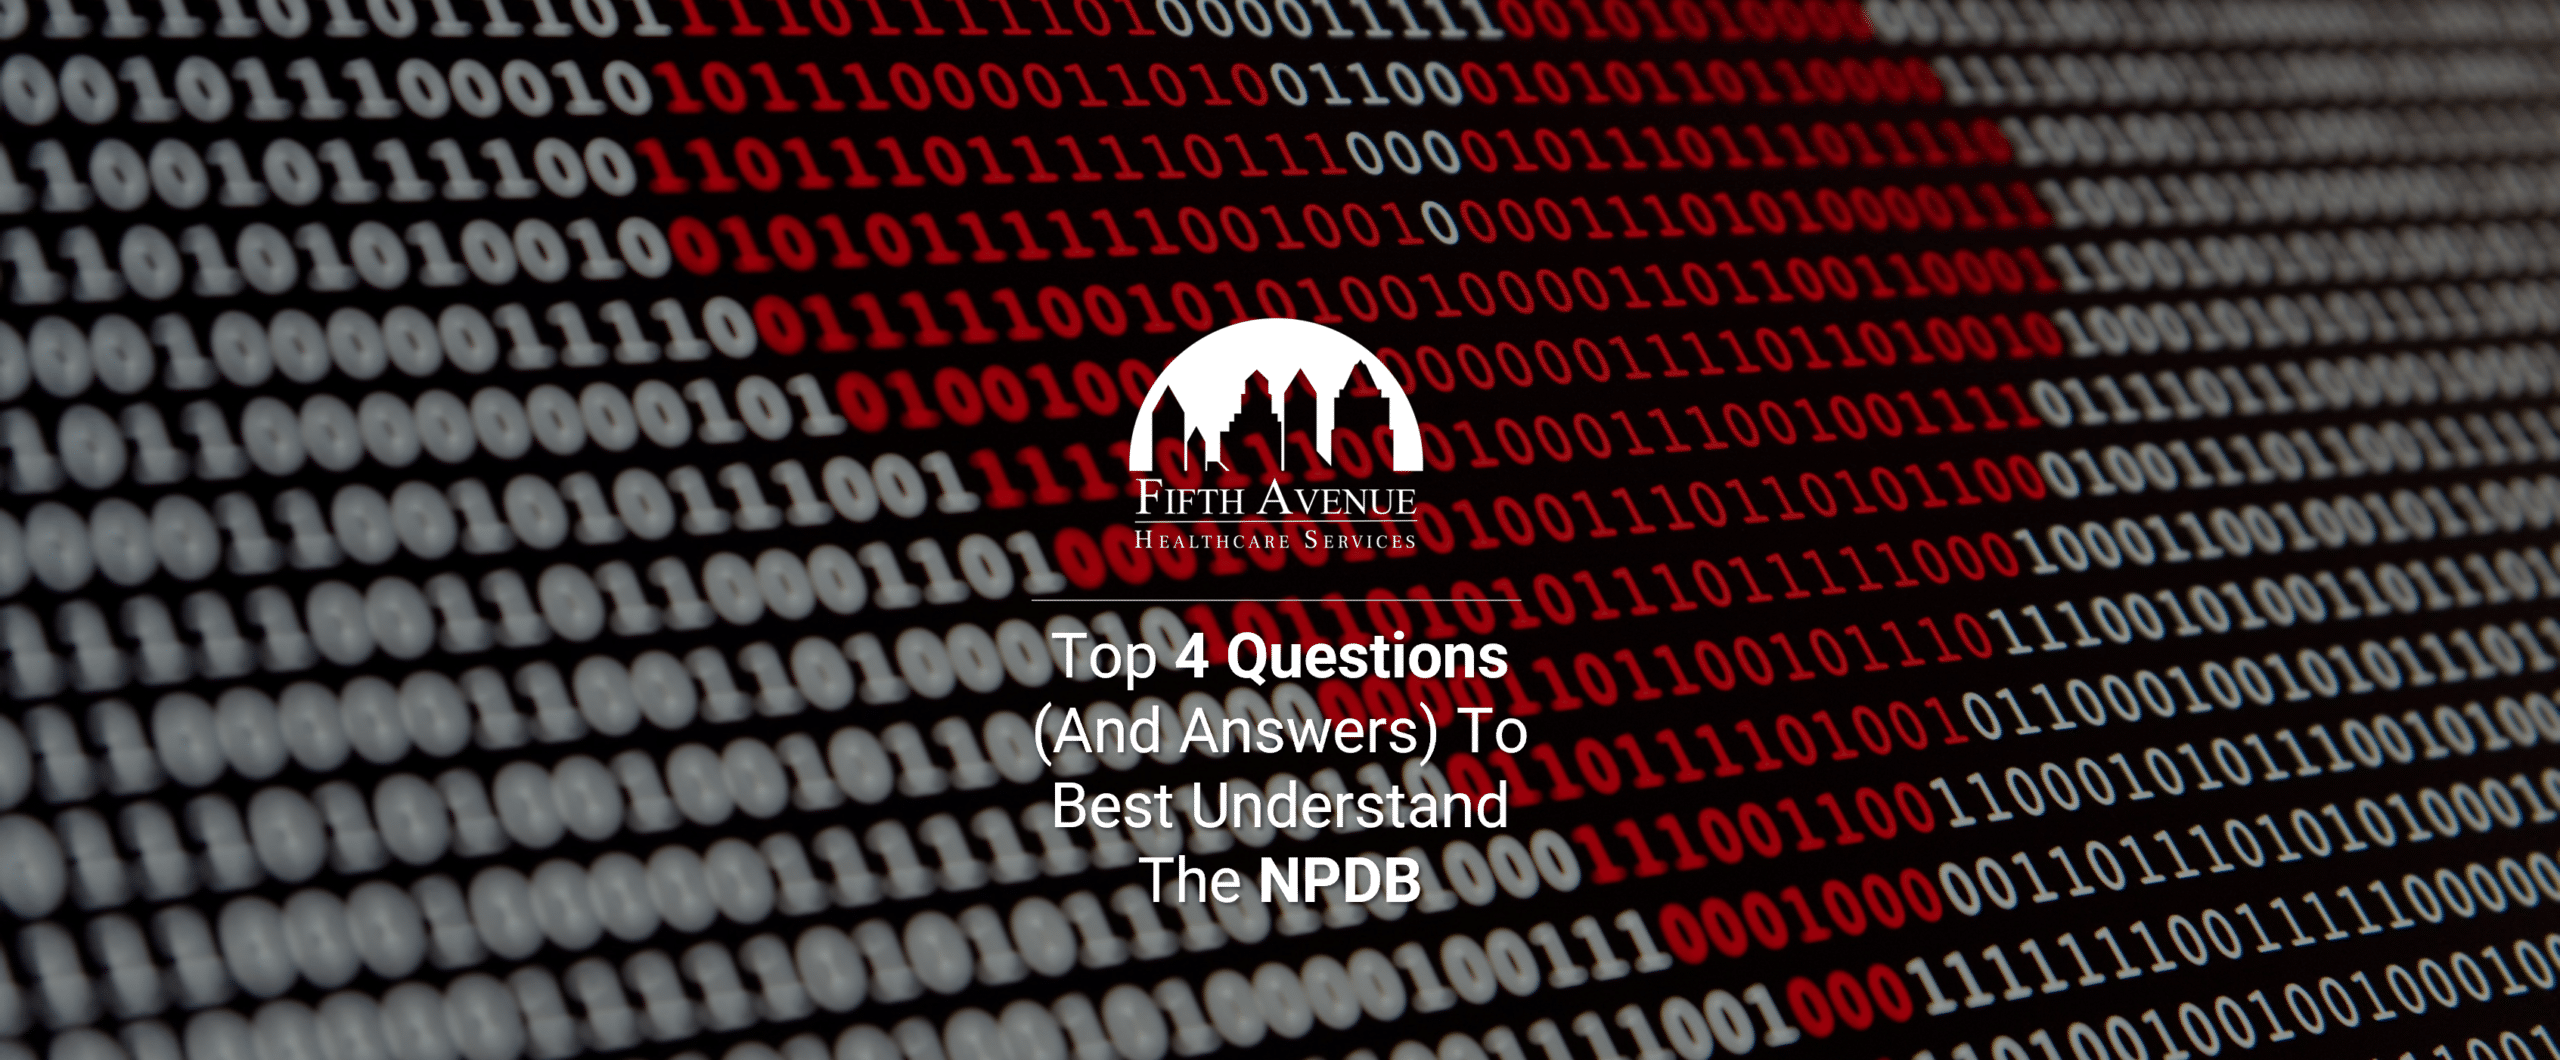 Top 4 Questions To Best Understand The NPDB